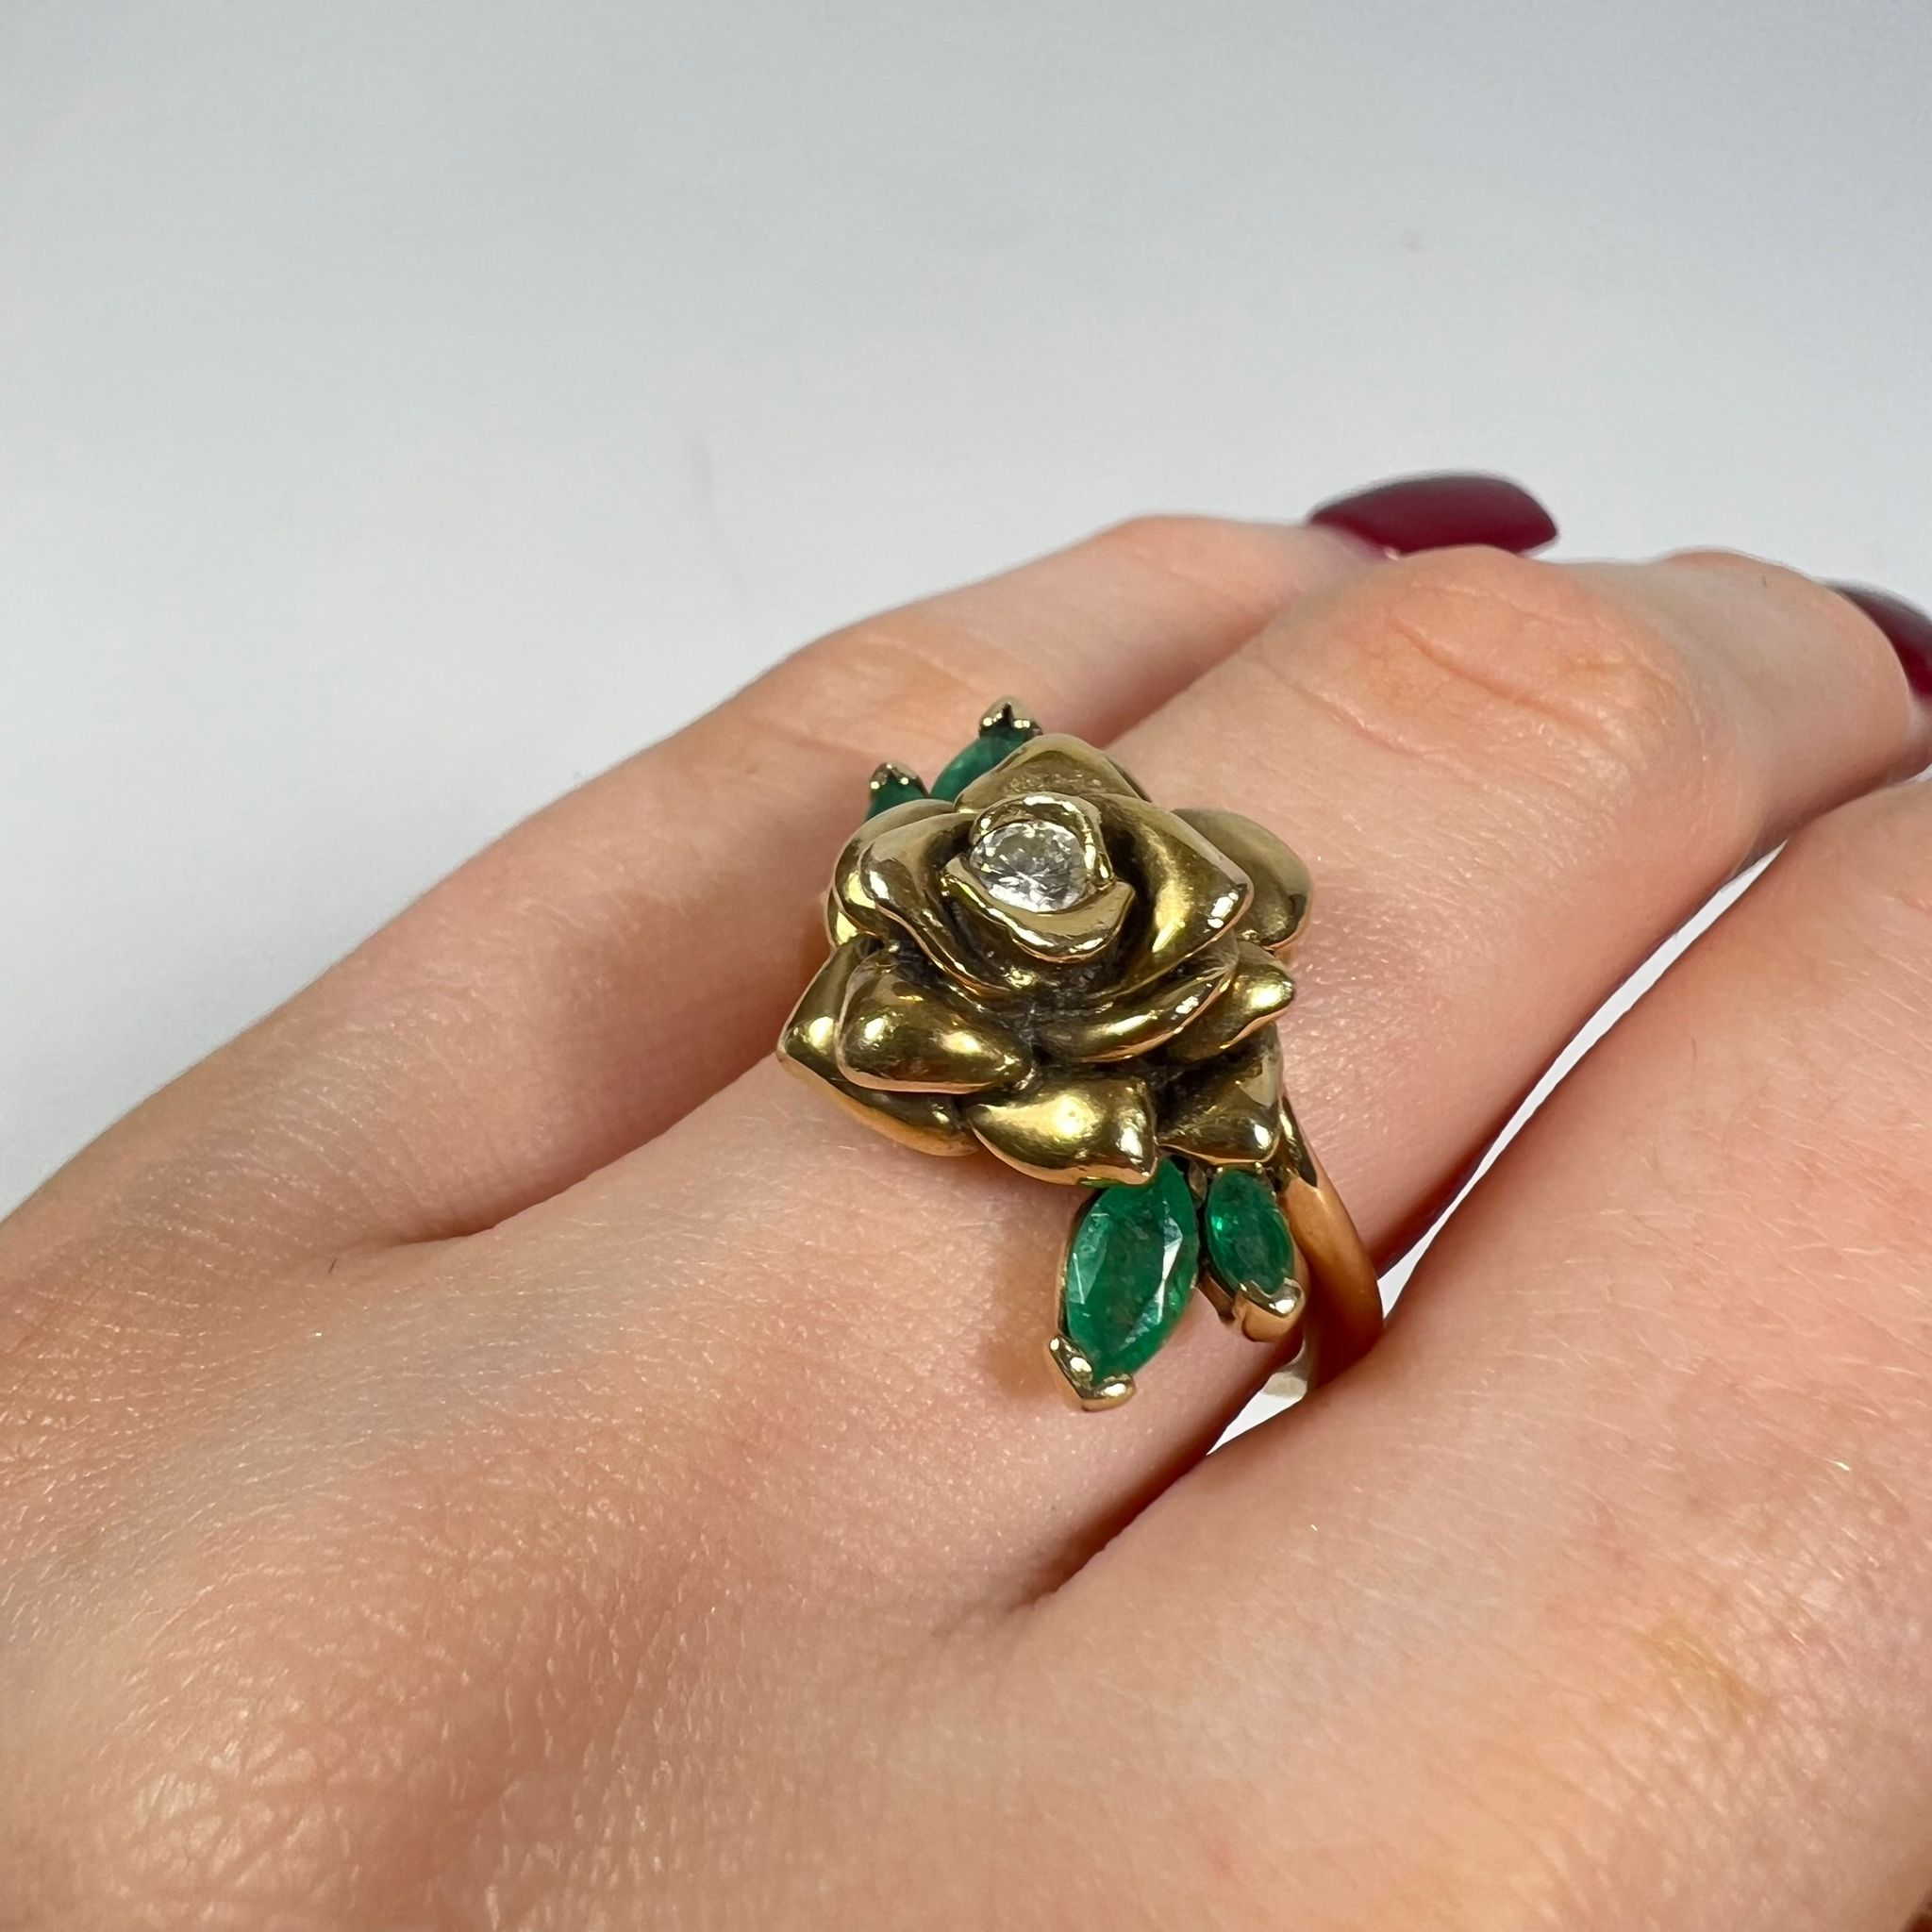 A 14ct yellow gold flowering rose diamond and emerald ring. Size L. Approximately 8.6 grams - Image 2 of 3